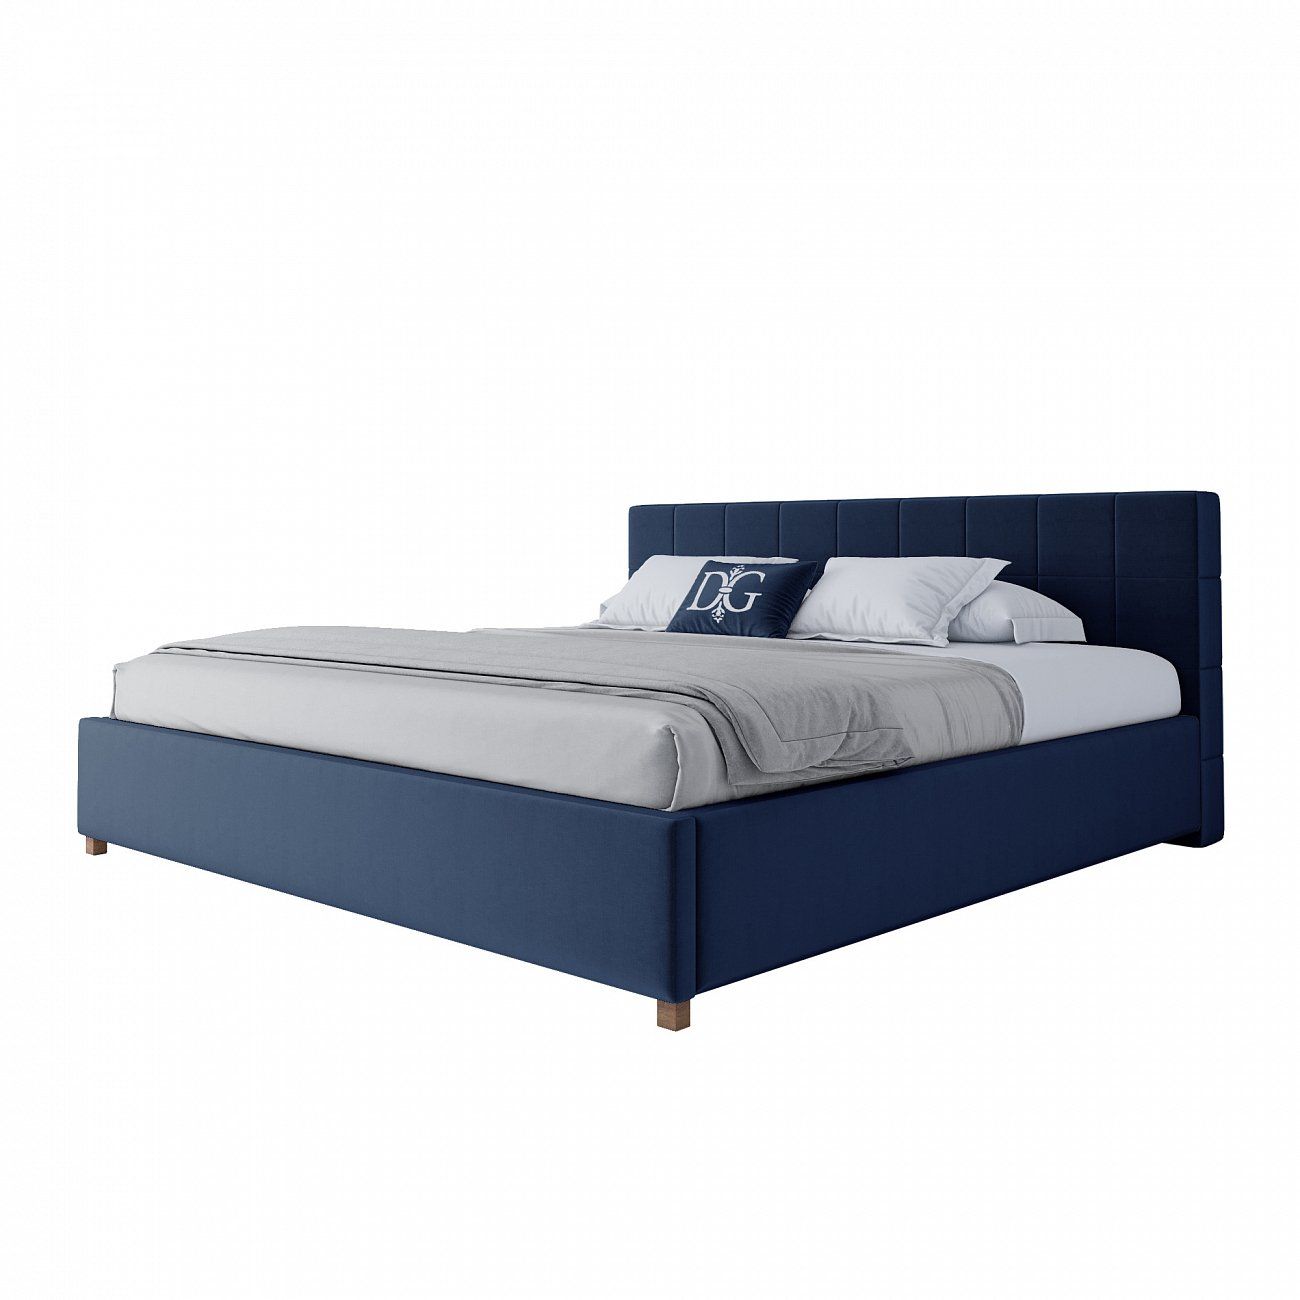 Large bed 200x200 Wales blue